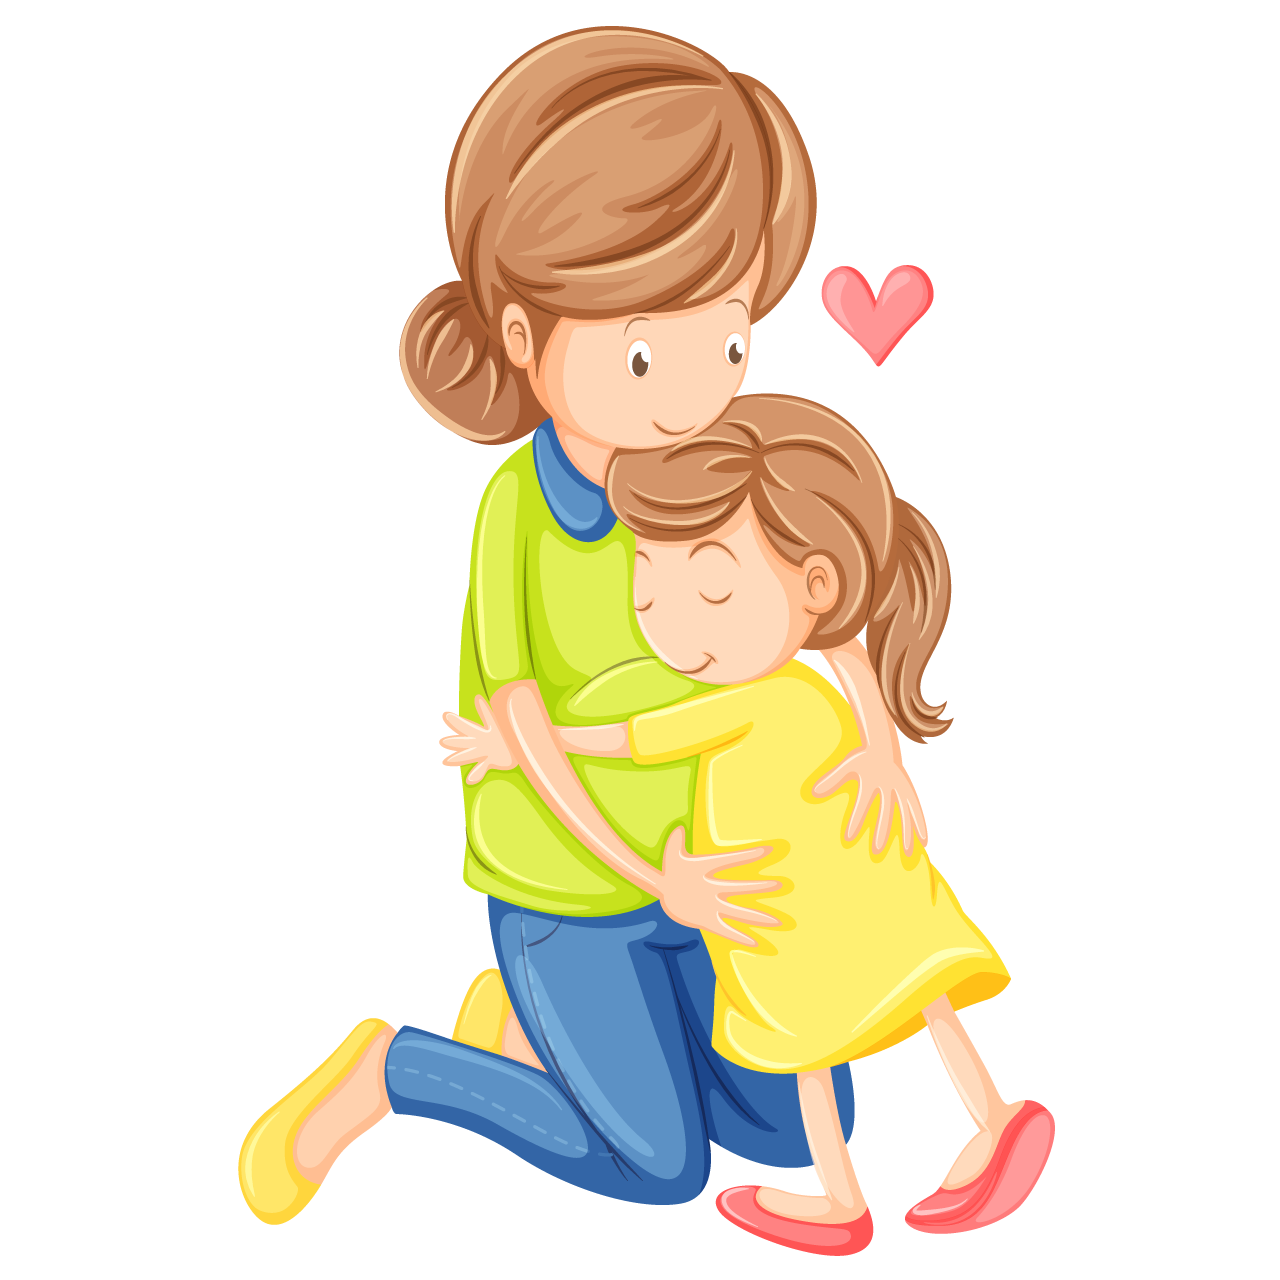 Red heart clipart child hugging her mother cartoon illustration image hand drawing sketch